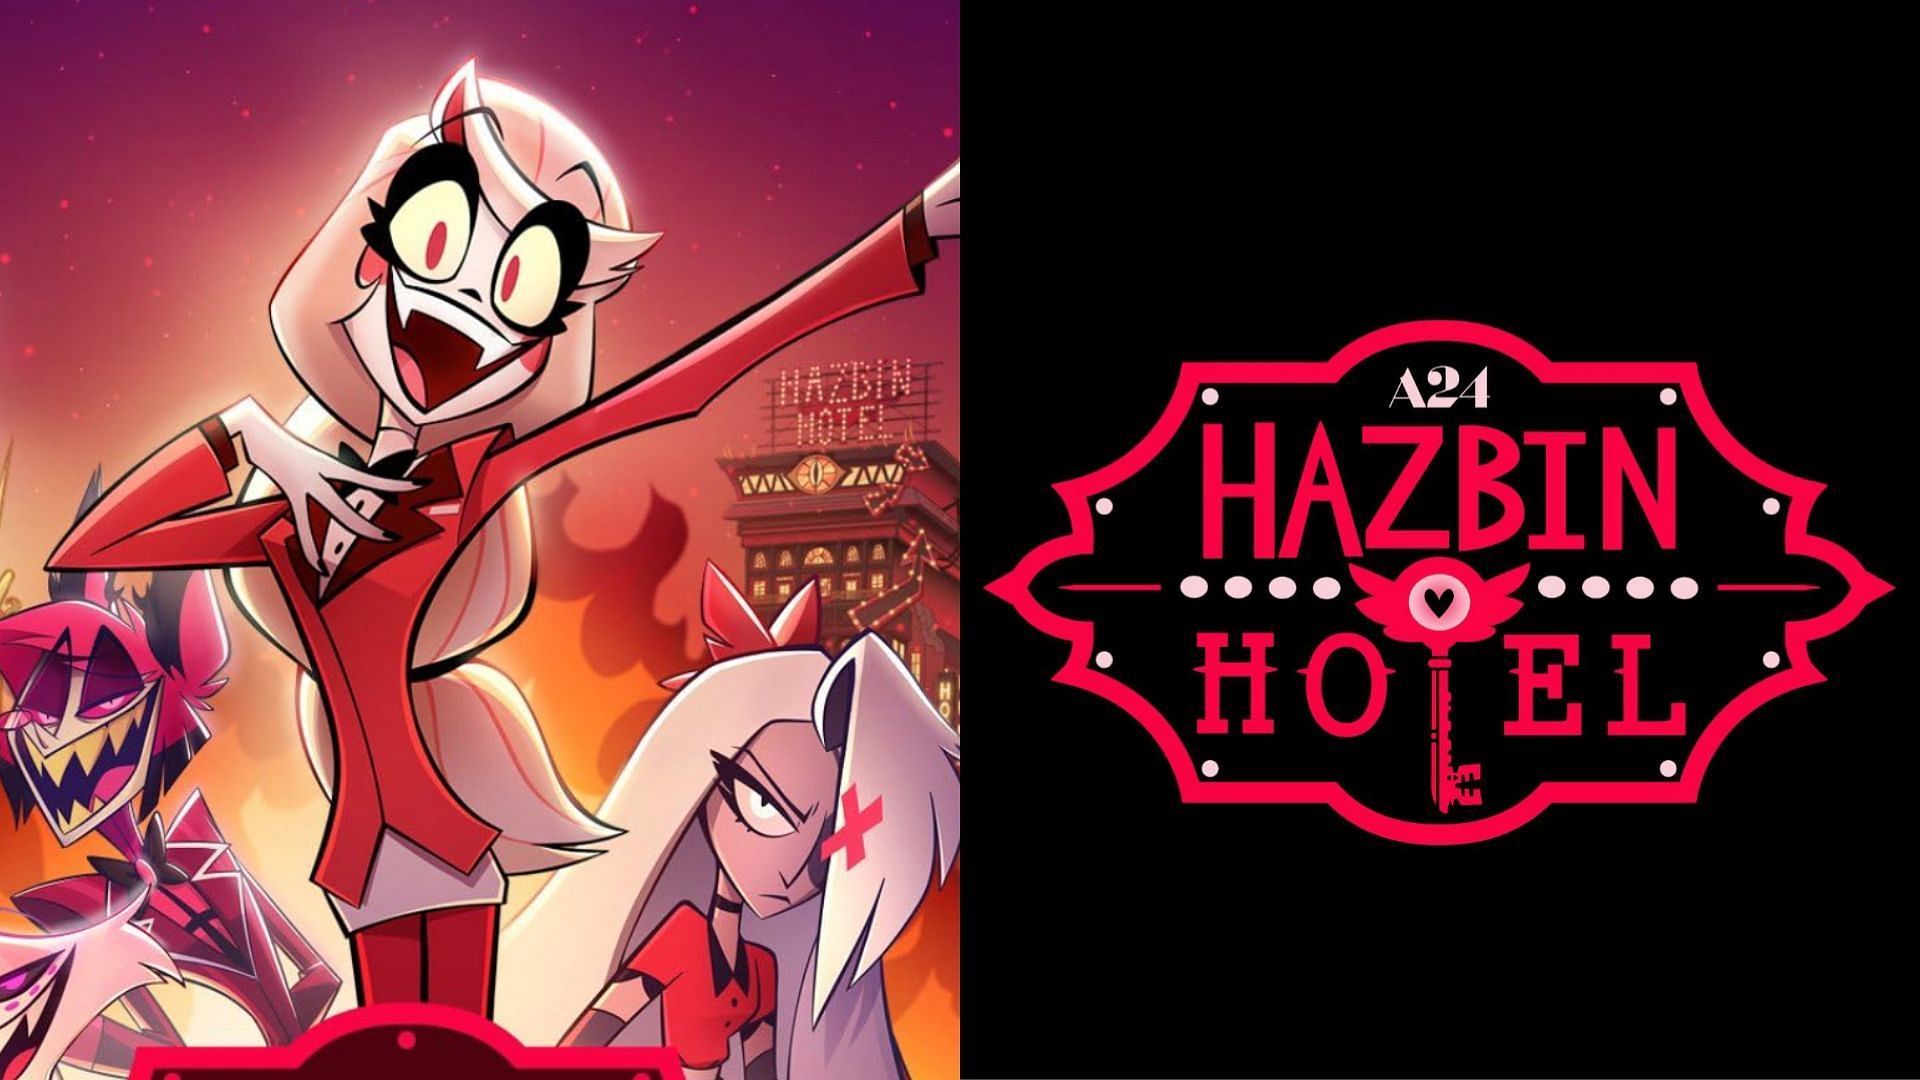 Fans can find out which Hazbin Hotel character they are based on their birth month (Images via Amazon Prime and A24)